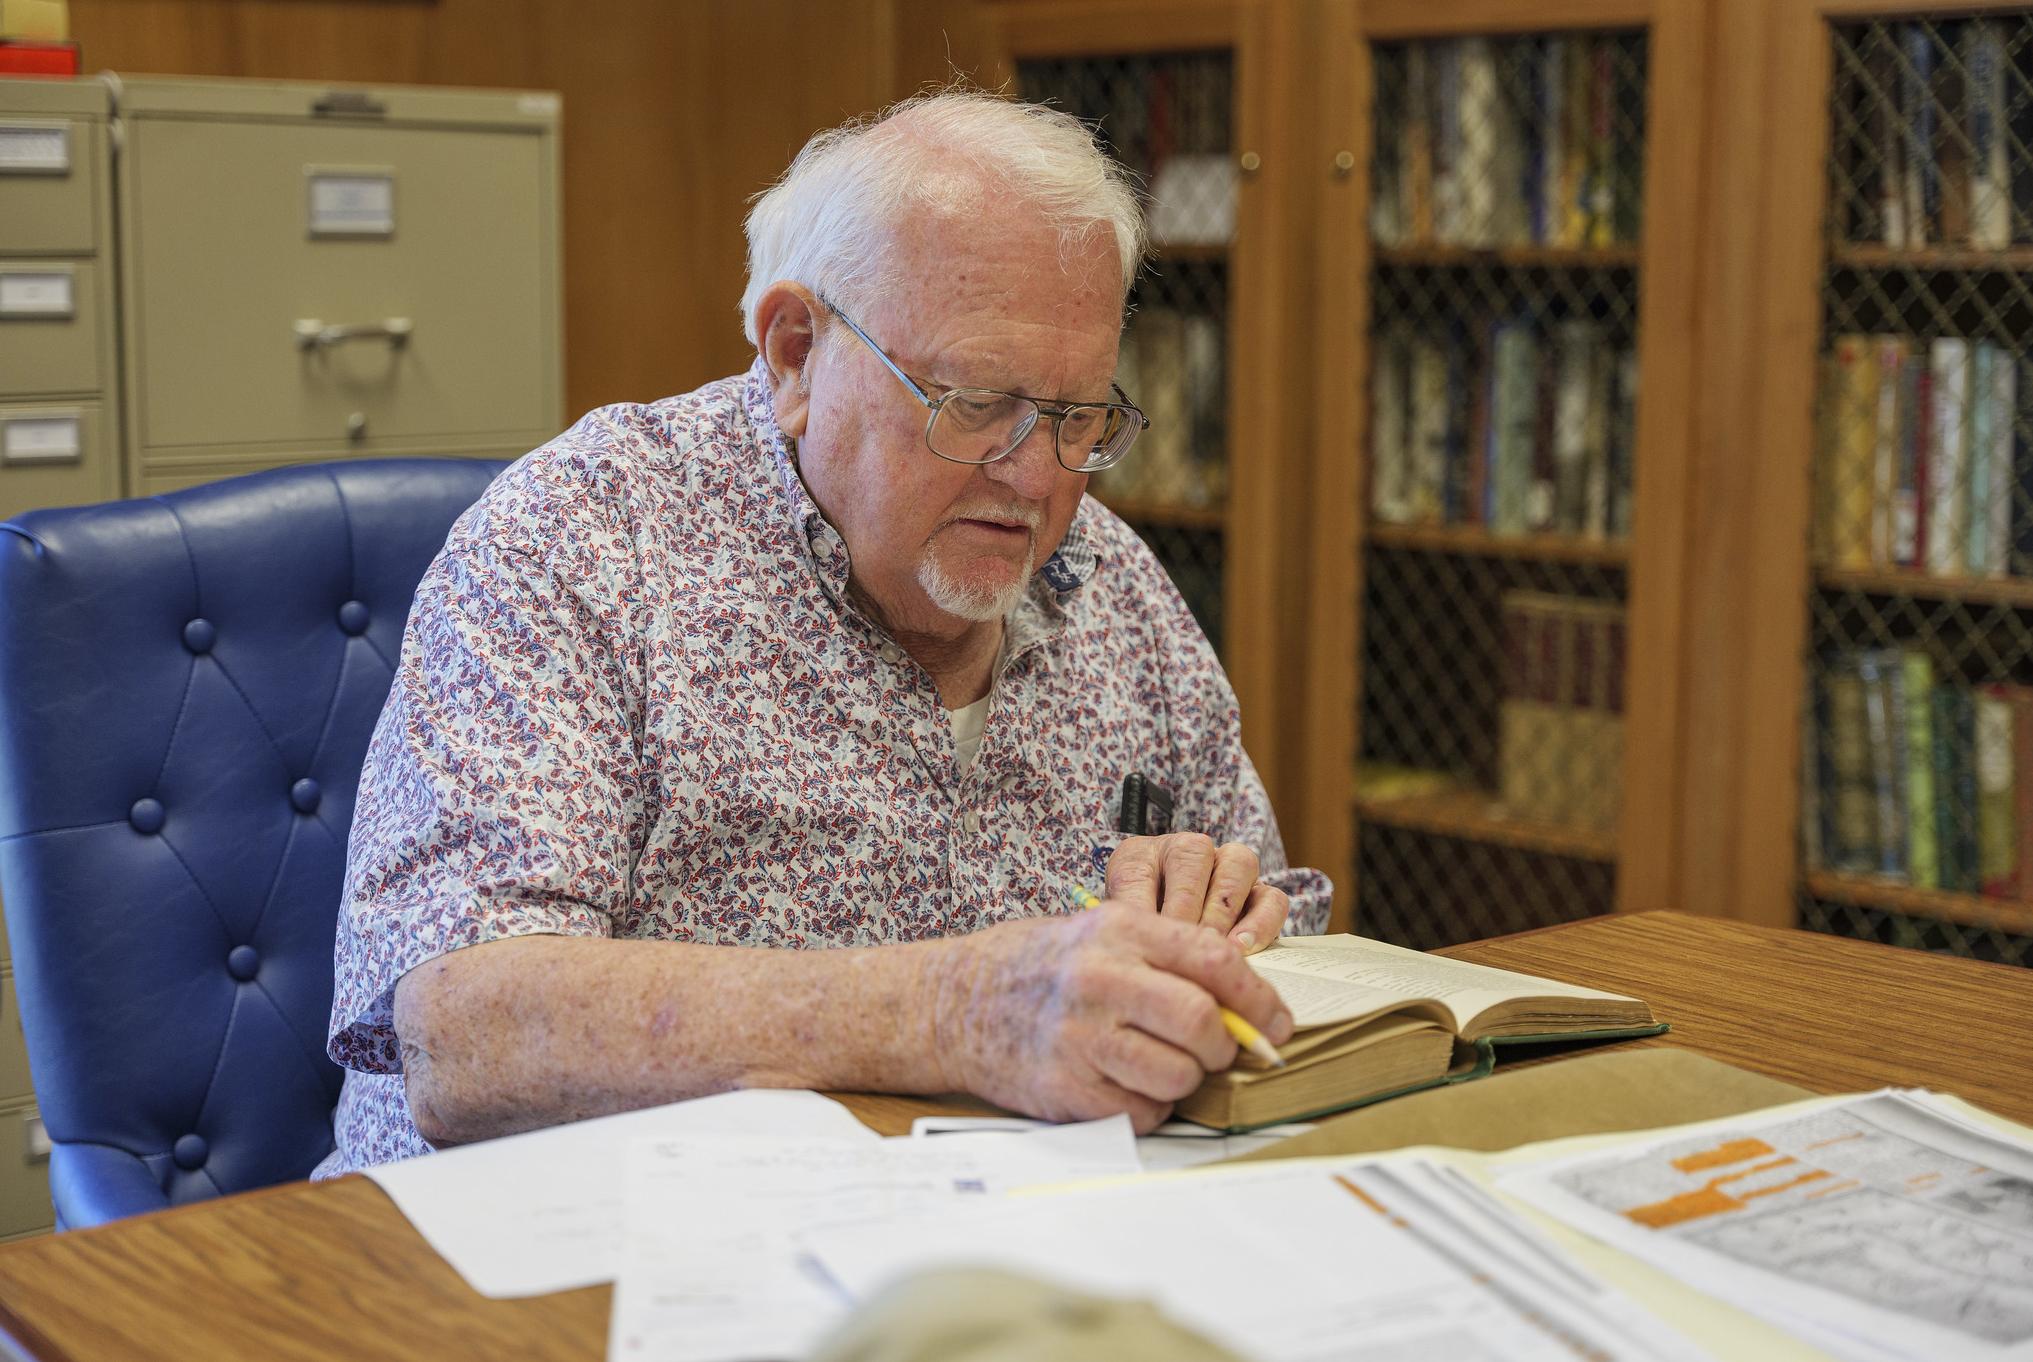 older man looks at a book intently